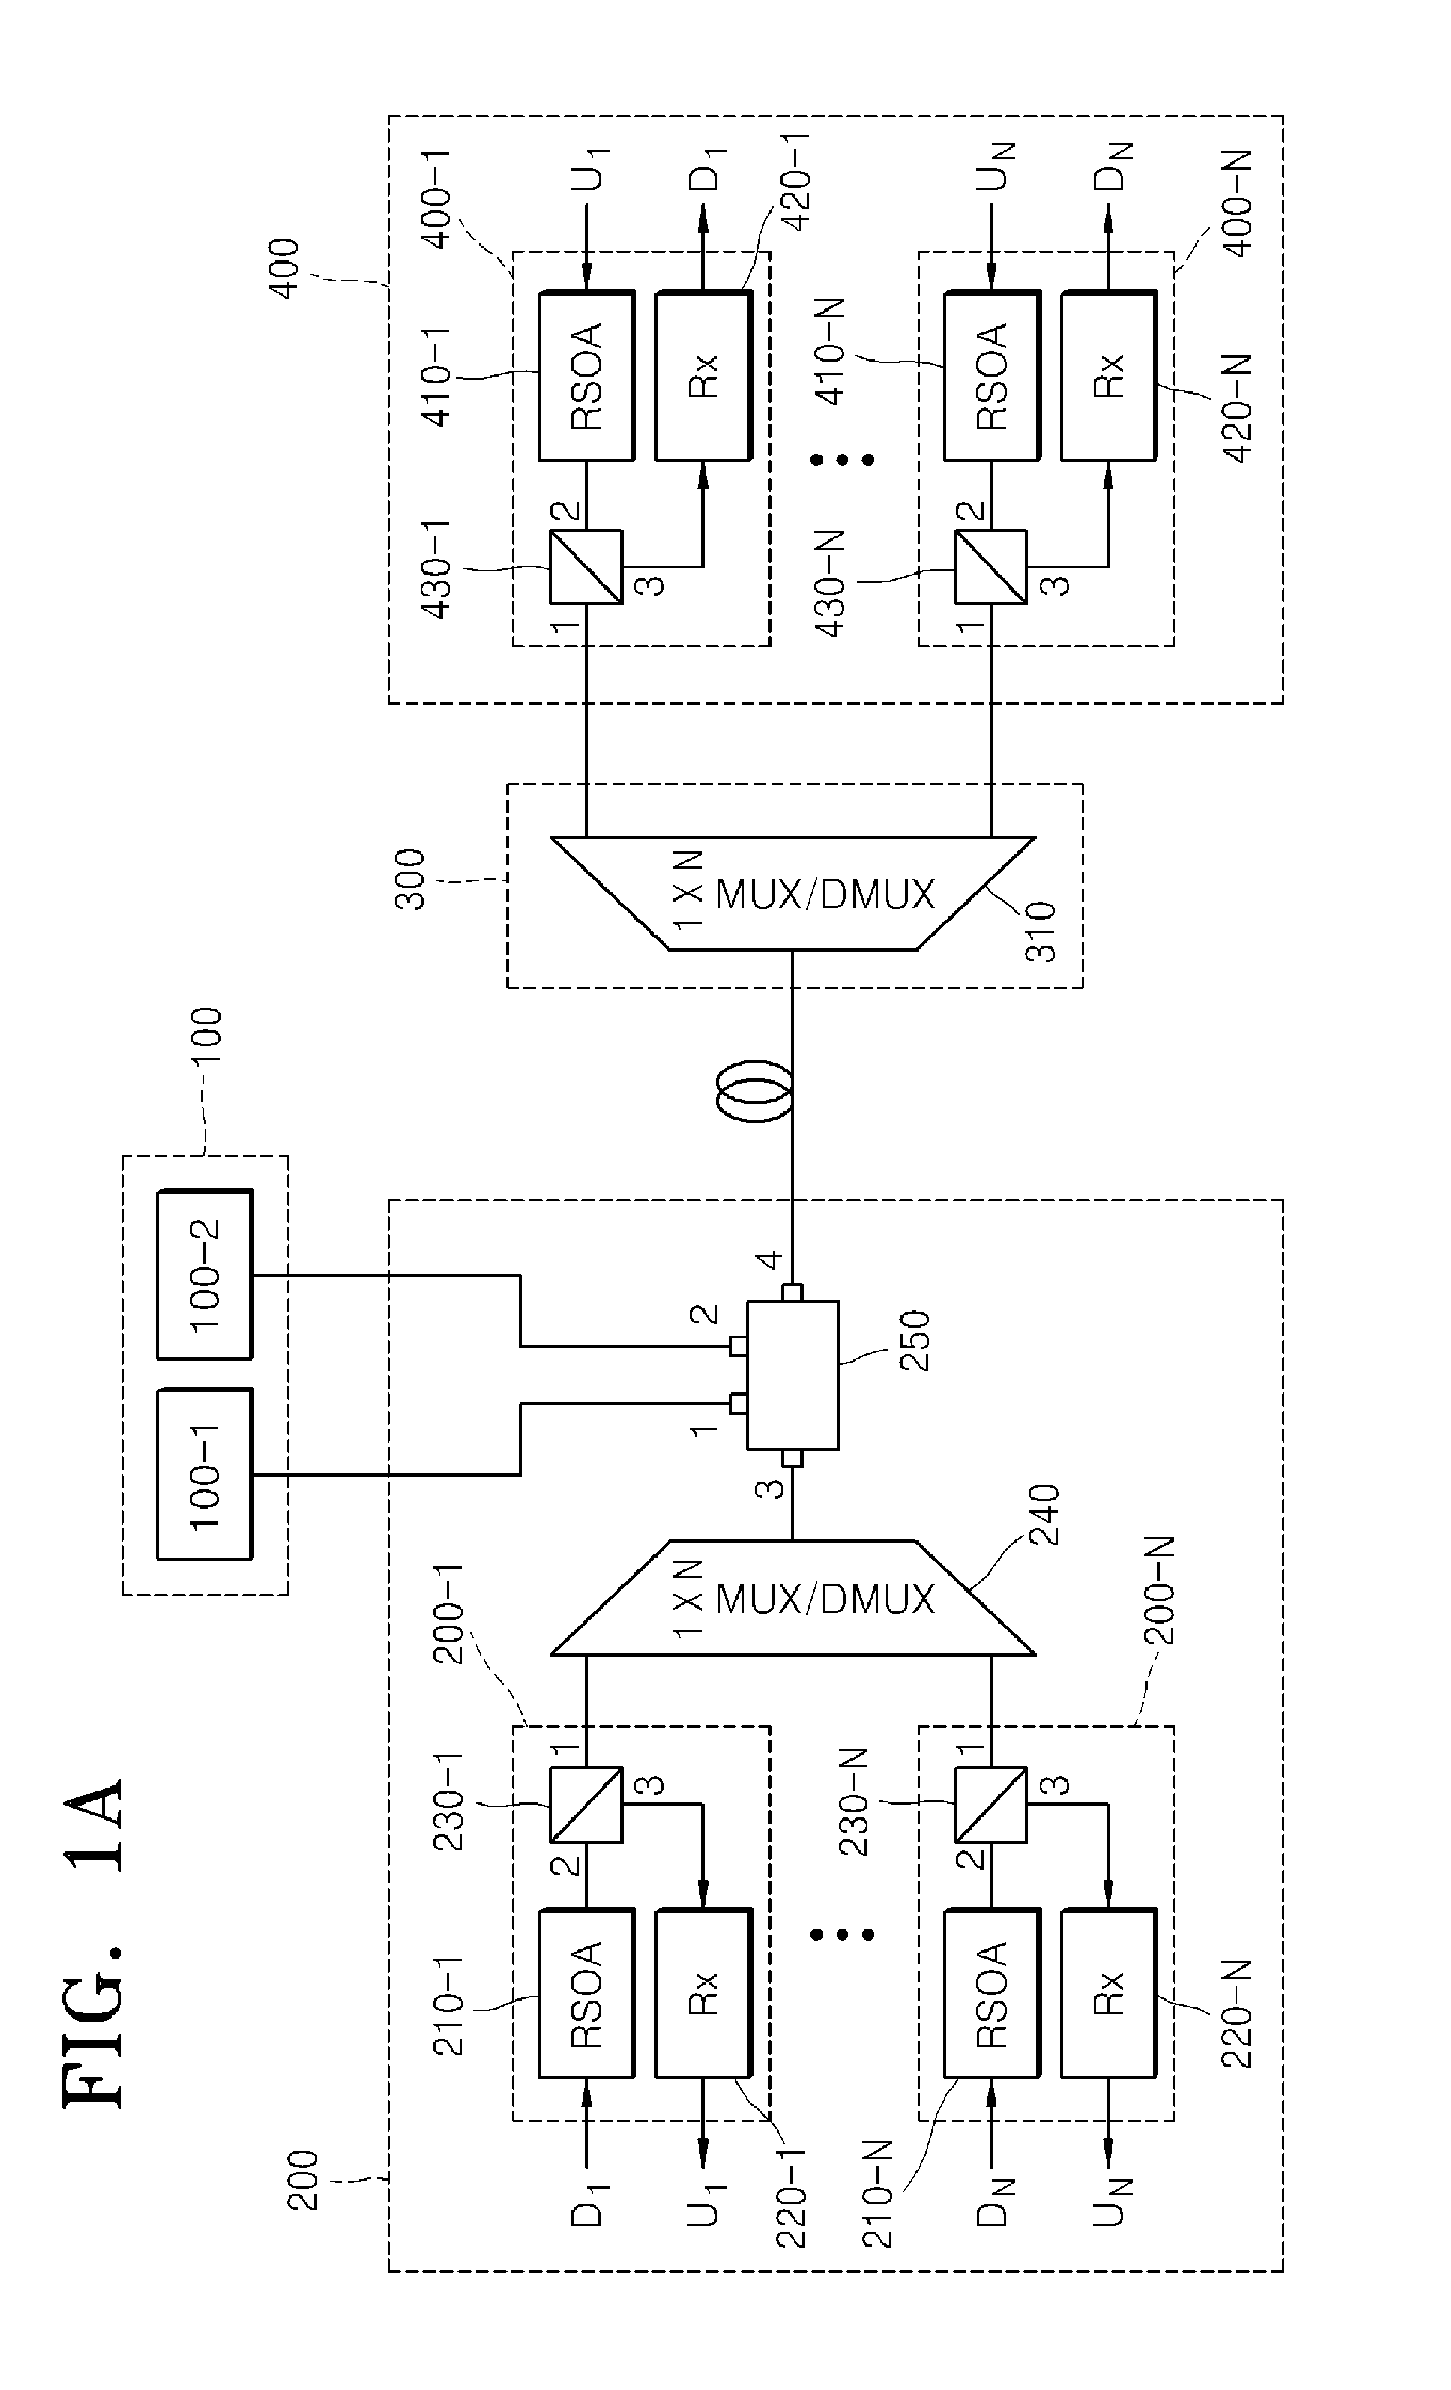 Wavelength division multiplexing-passive optical network using external seed light source